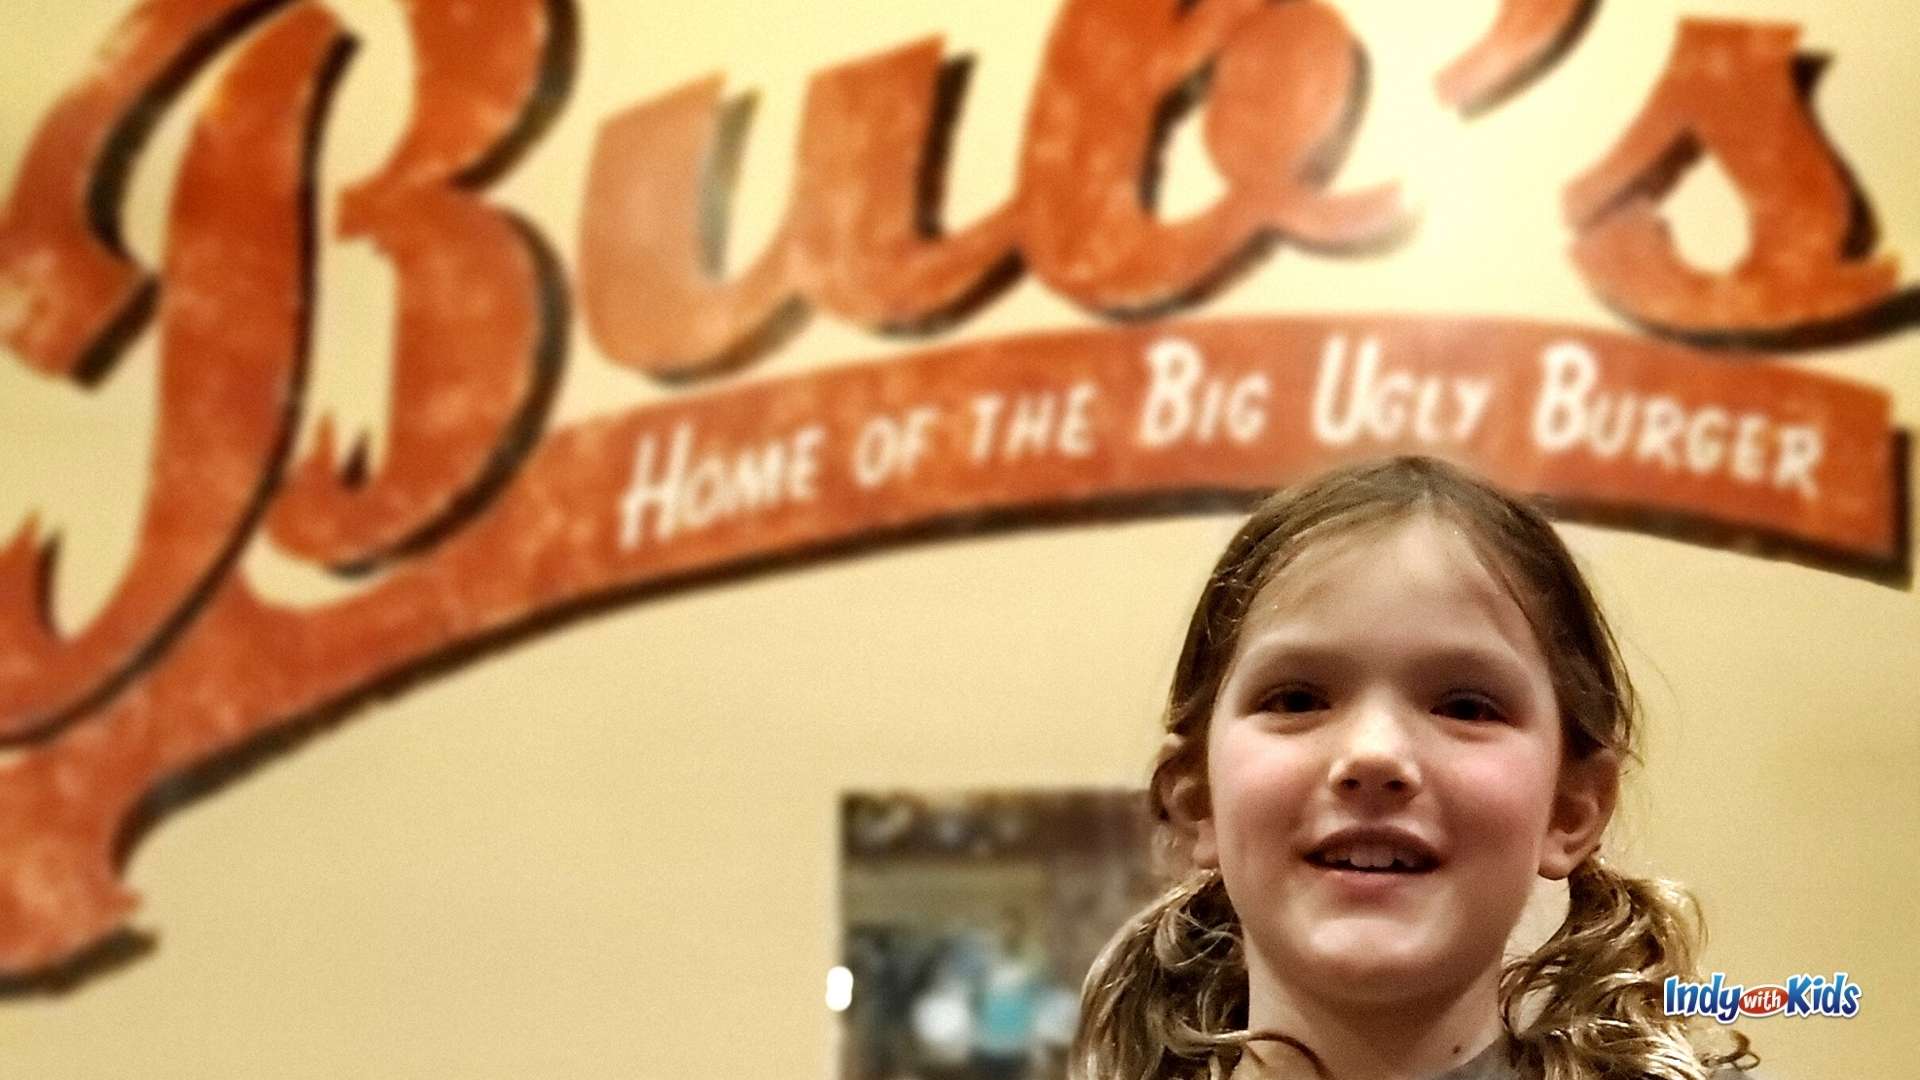 The Best Burger in Indianapolis: A girl with pigtails smiles in front of the Bub's Burgers sign.